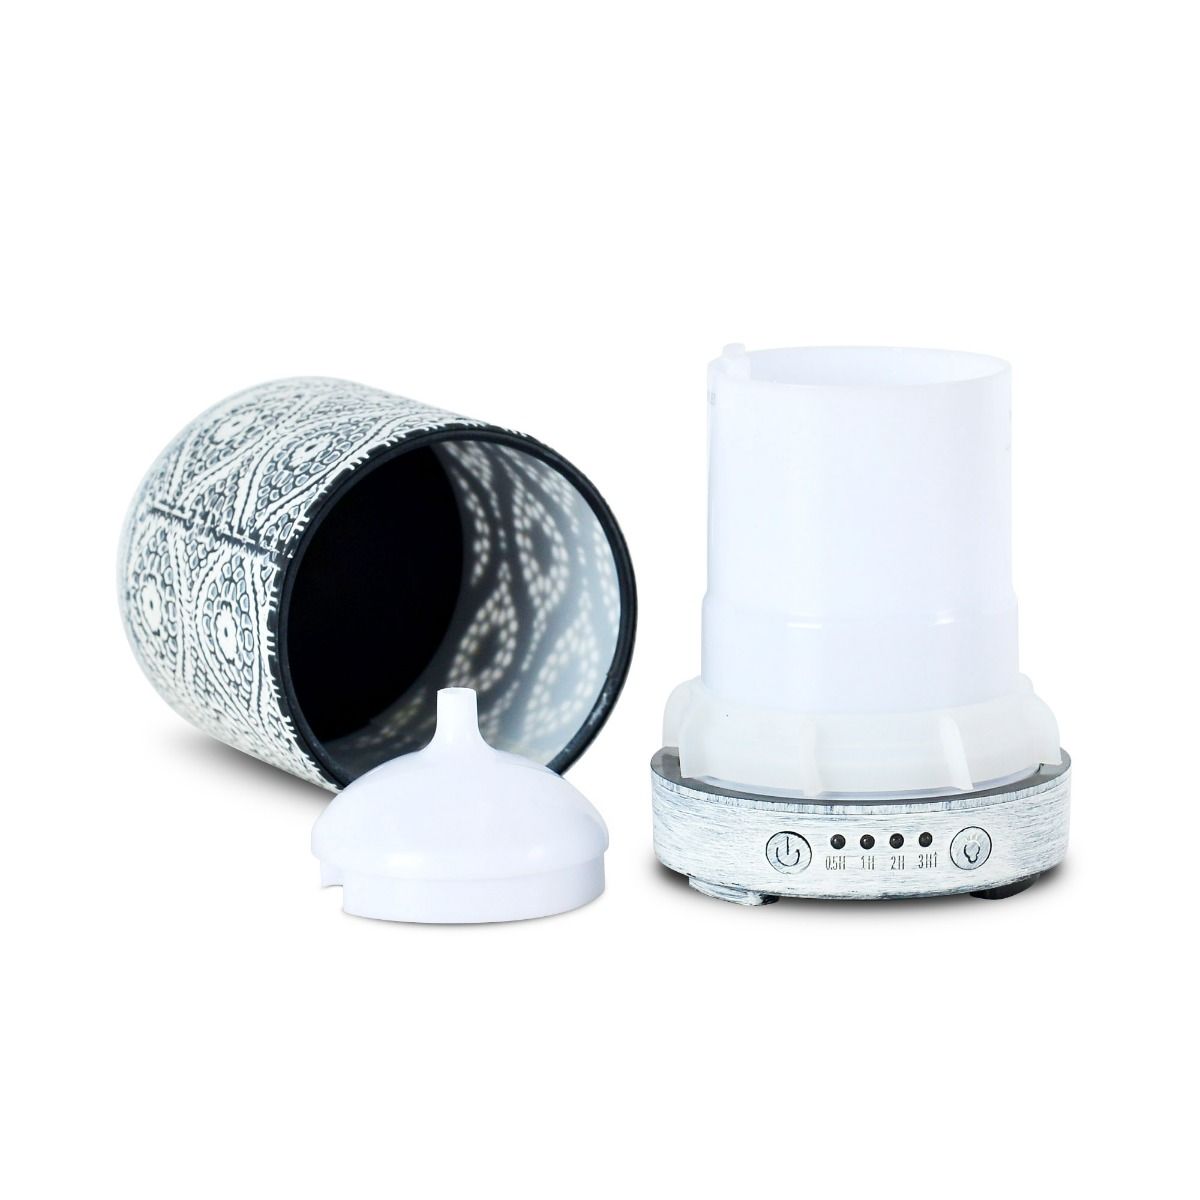 100ml Metal Essential Oil and Aroma Diffuser-Vintage White